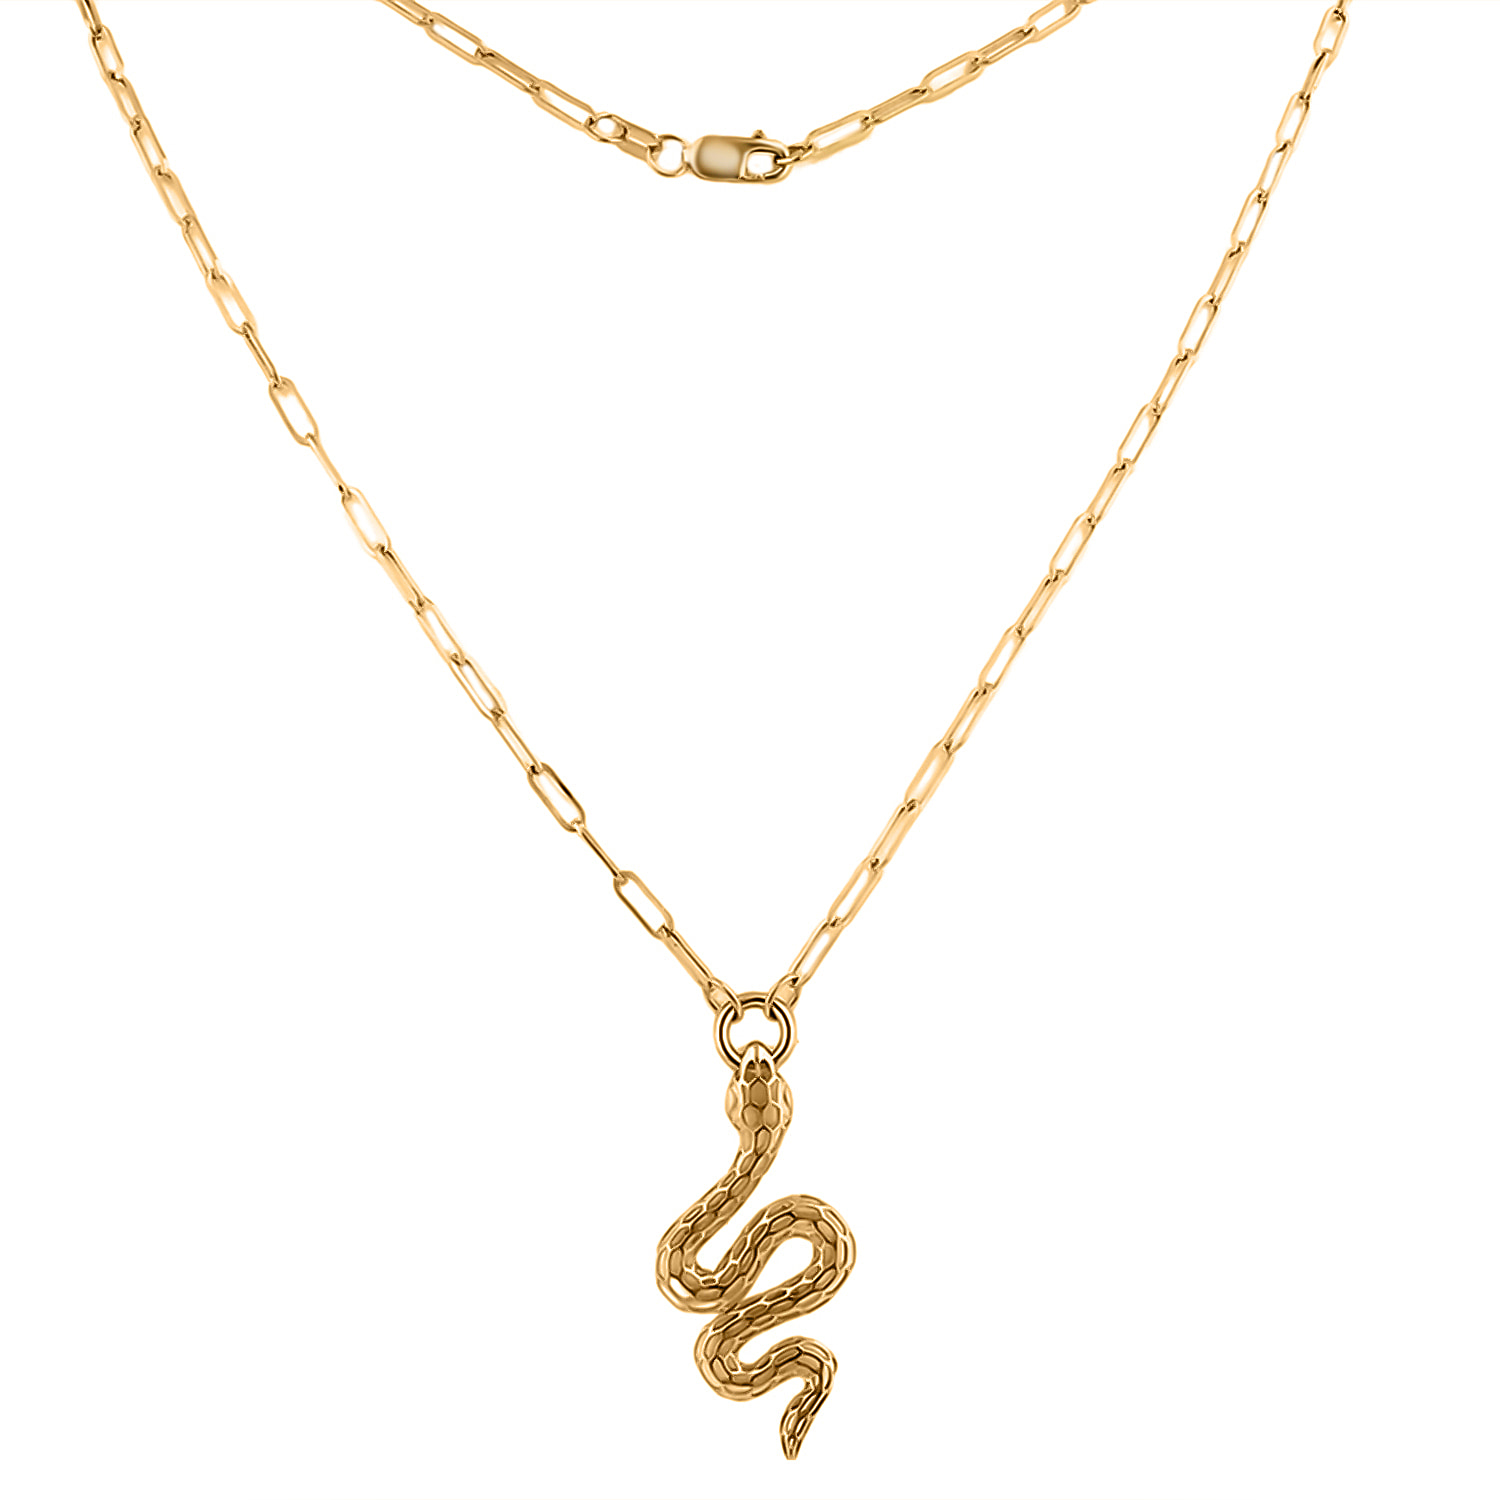 Closeout Deal - Designer Inspired Handmade 9K Yellow Gold Serpent Necklace (Size - 20)